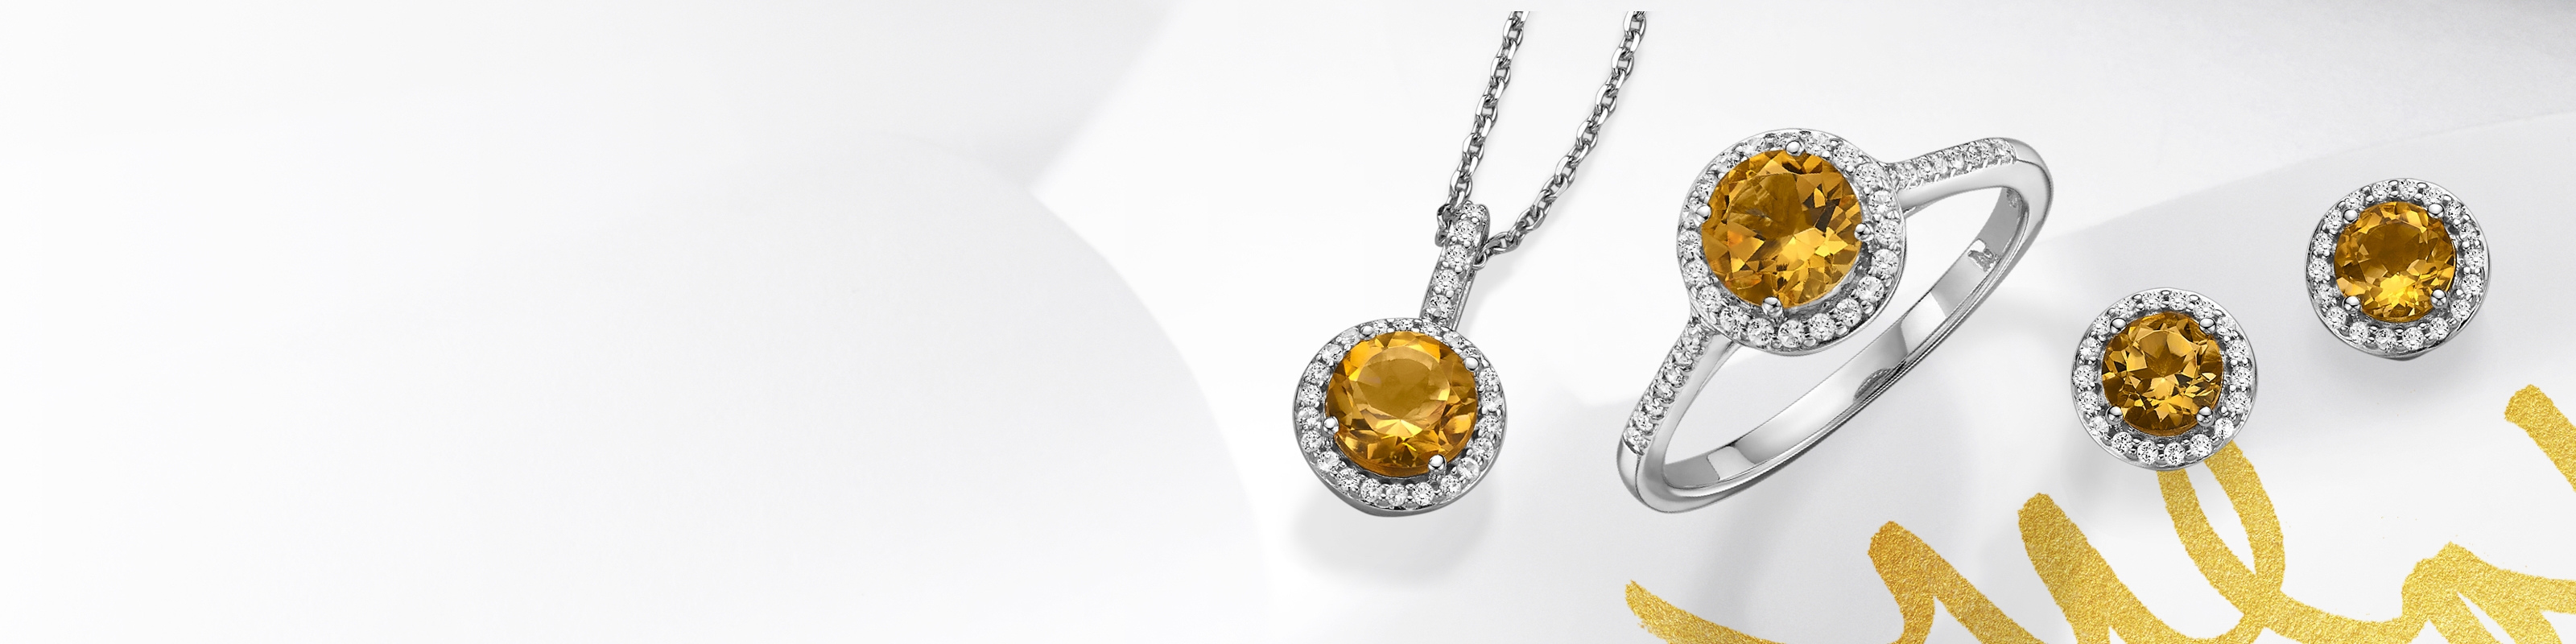 Citrine ring, earrings and necklace set in white gold. Shop all citrine jewelry at Jared.